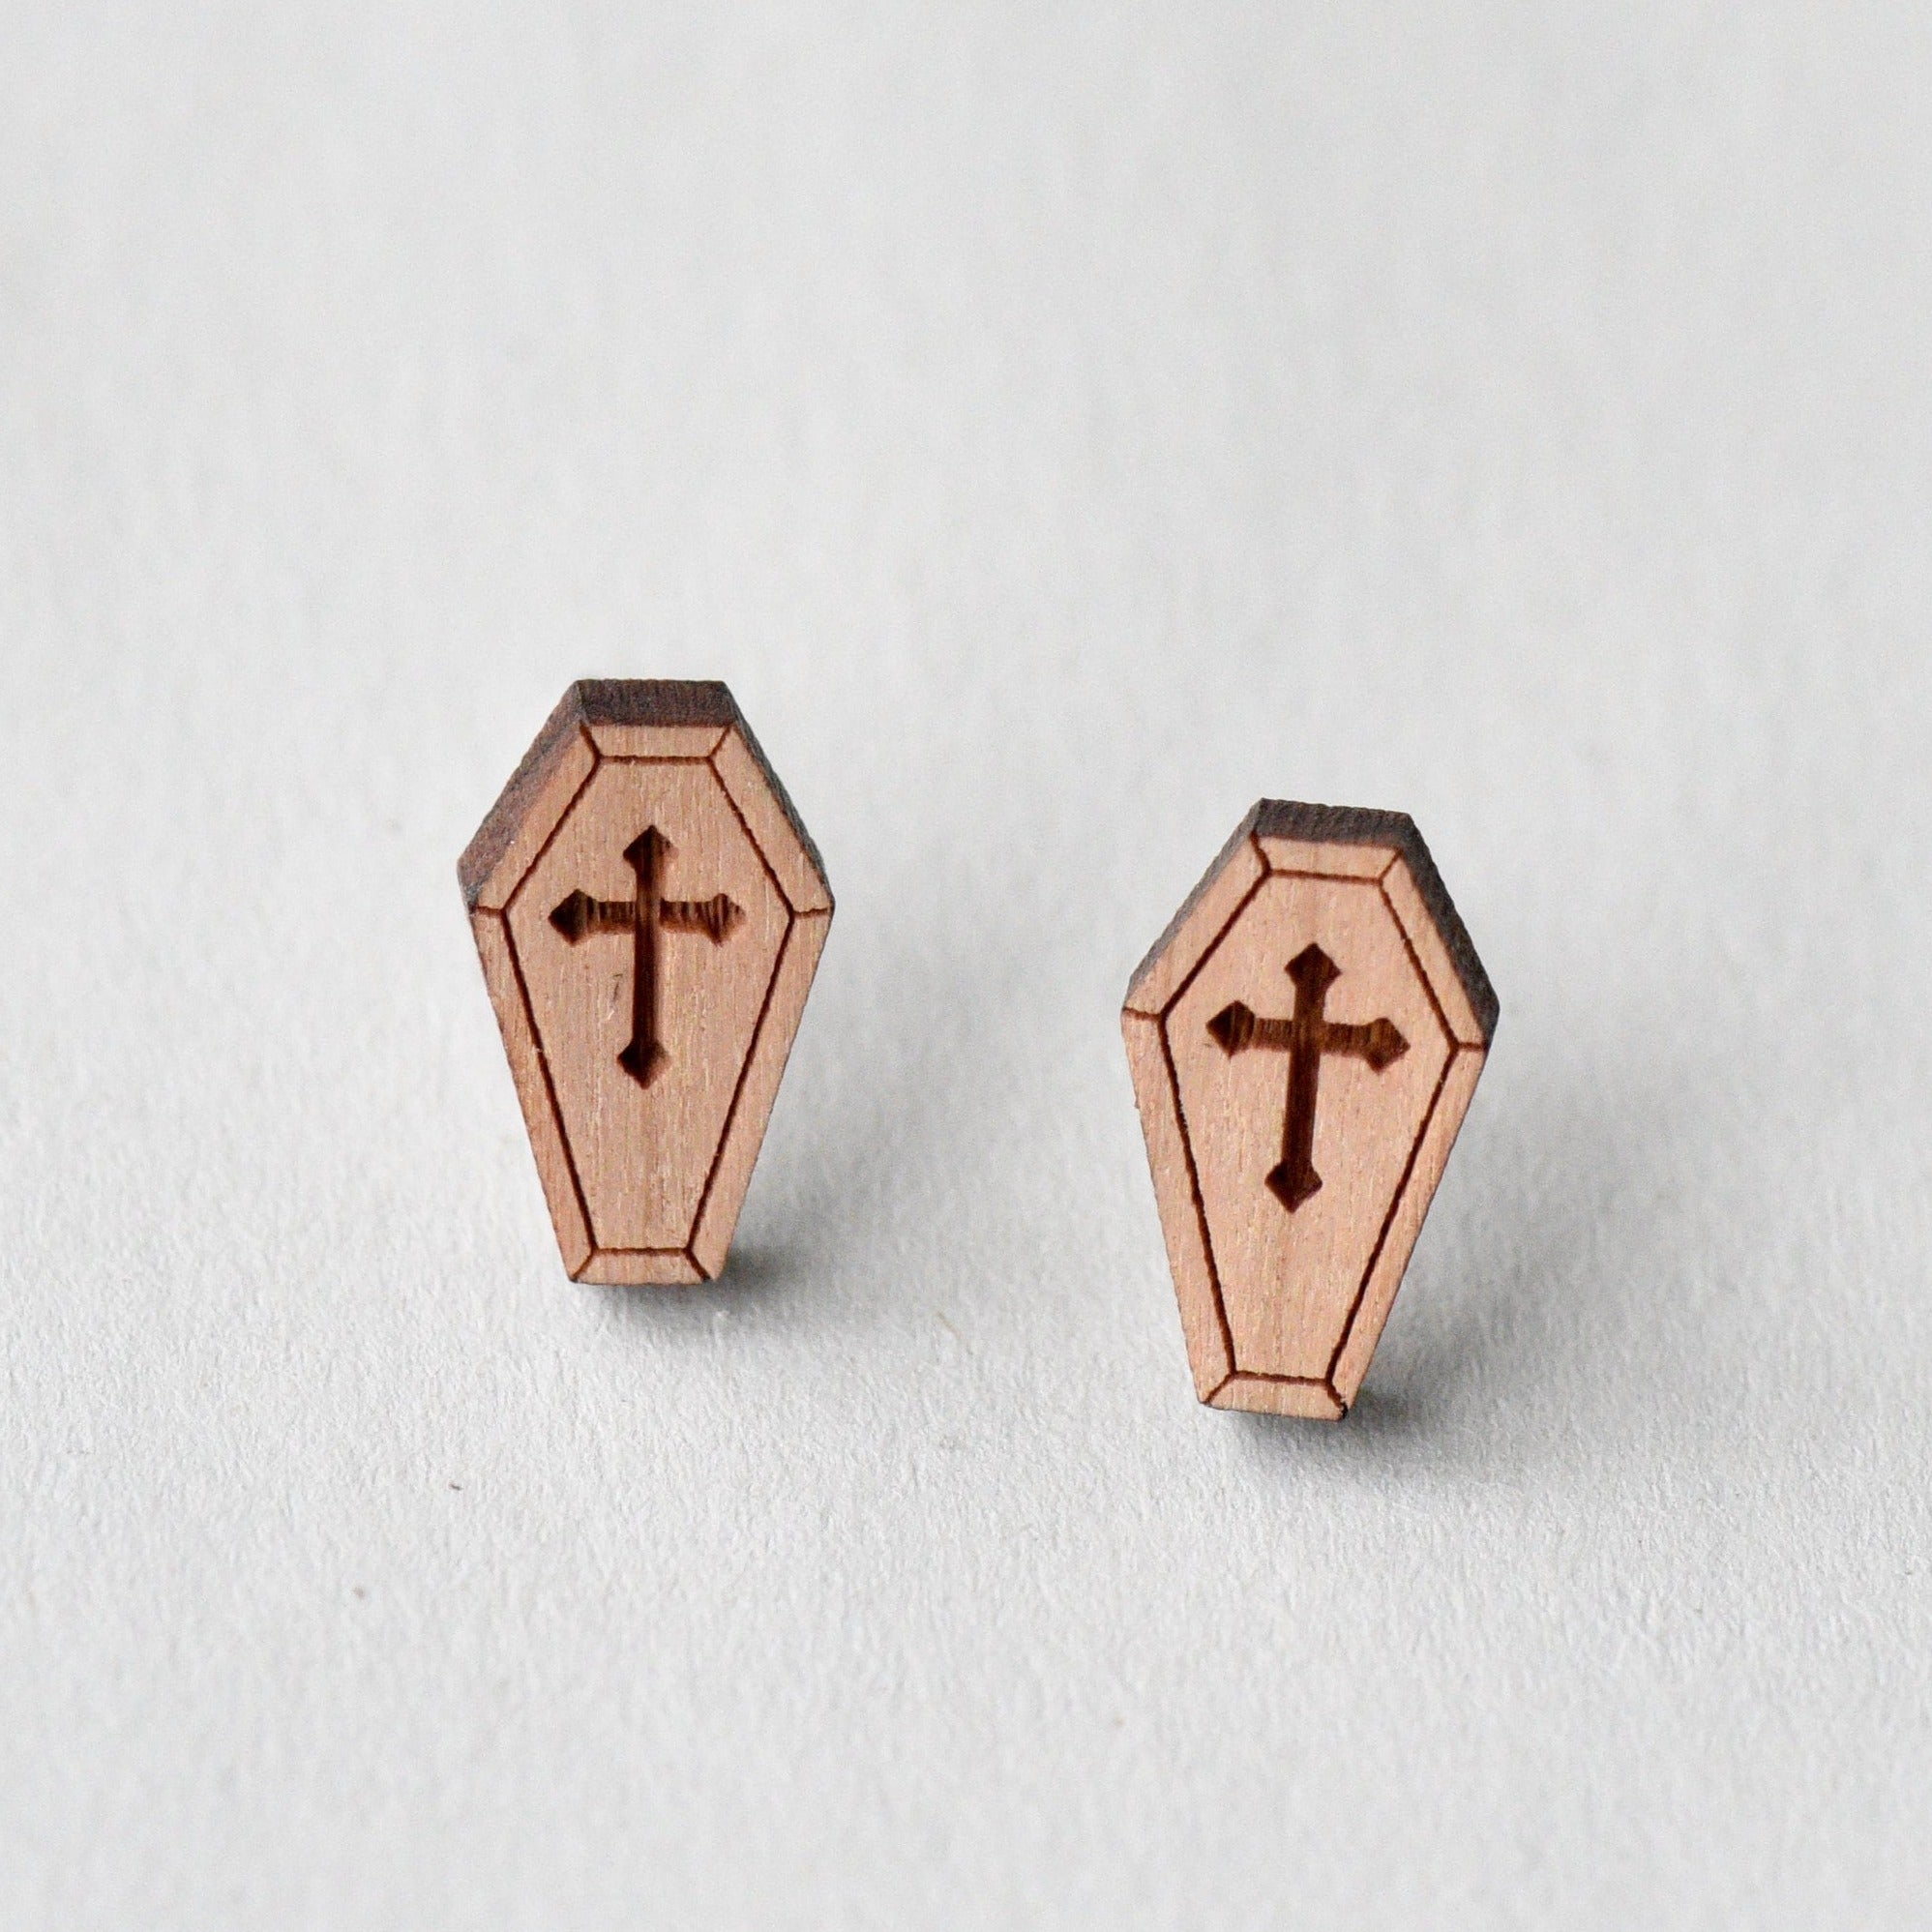 Gothic Coffin Cherry Wood Stud Earrings - ET15032 - Robin Valley Official Store